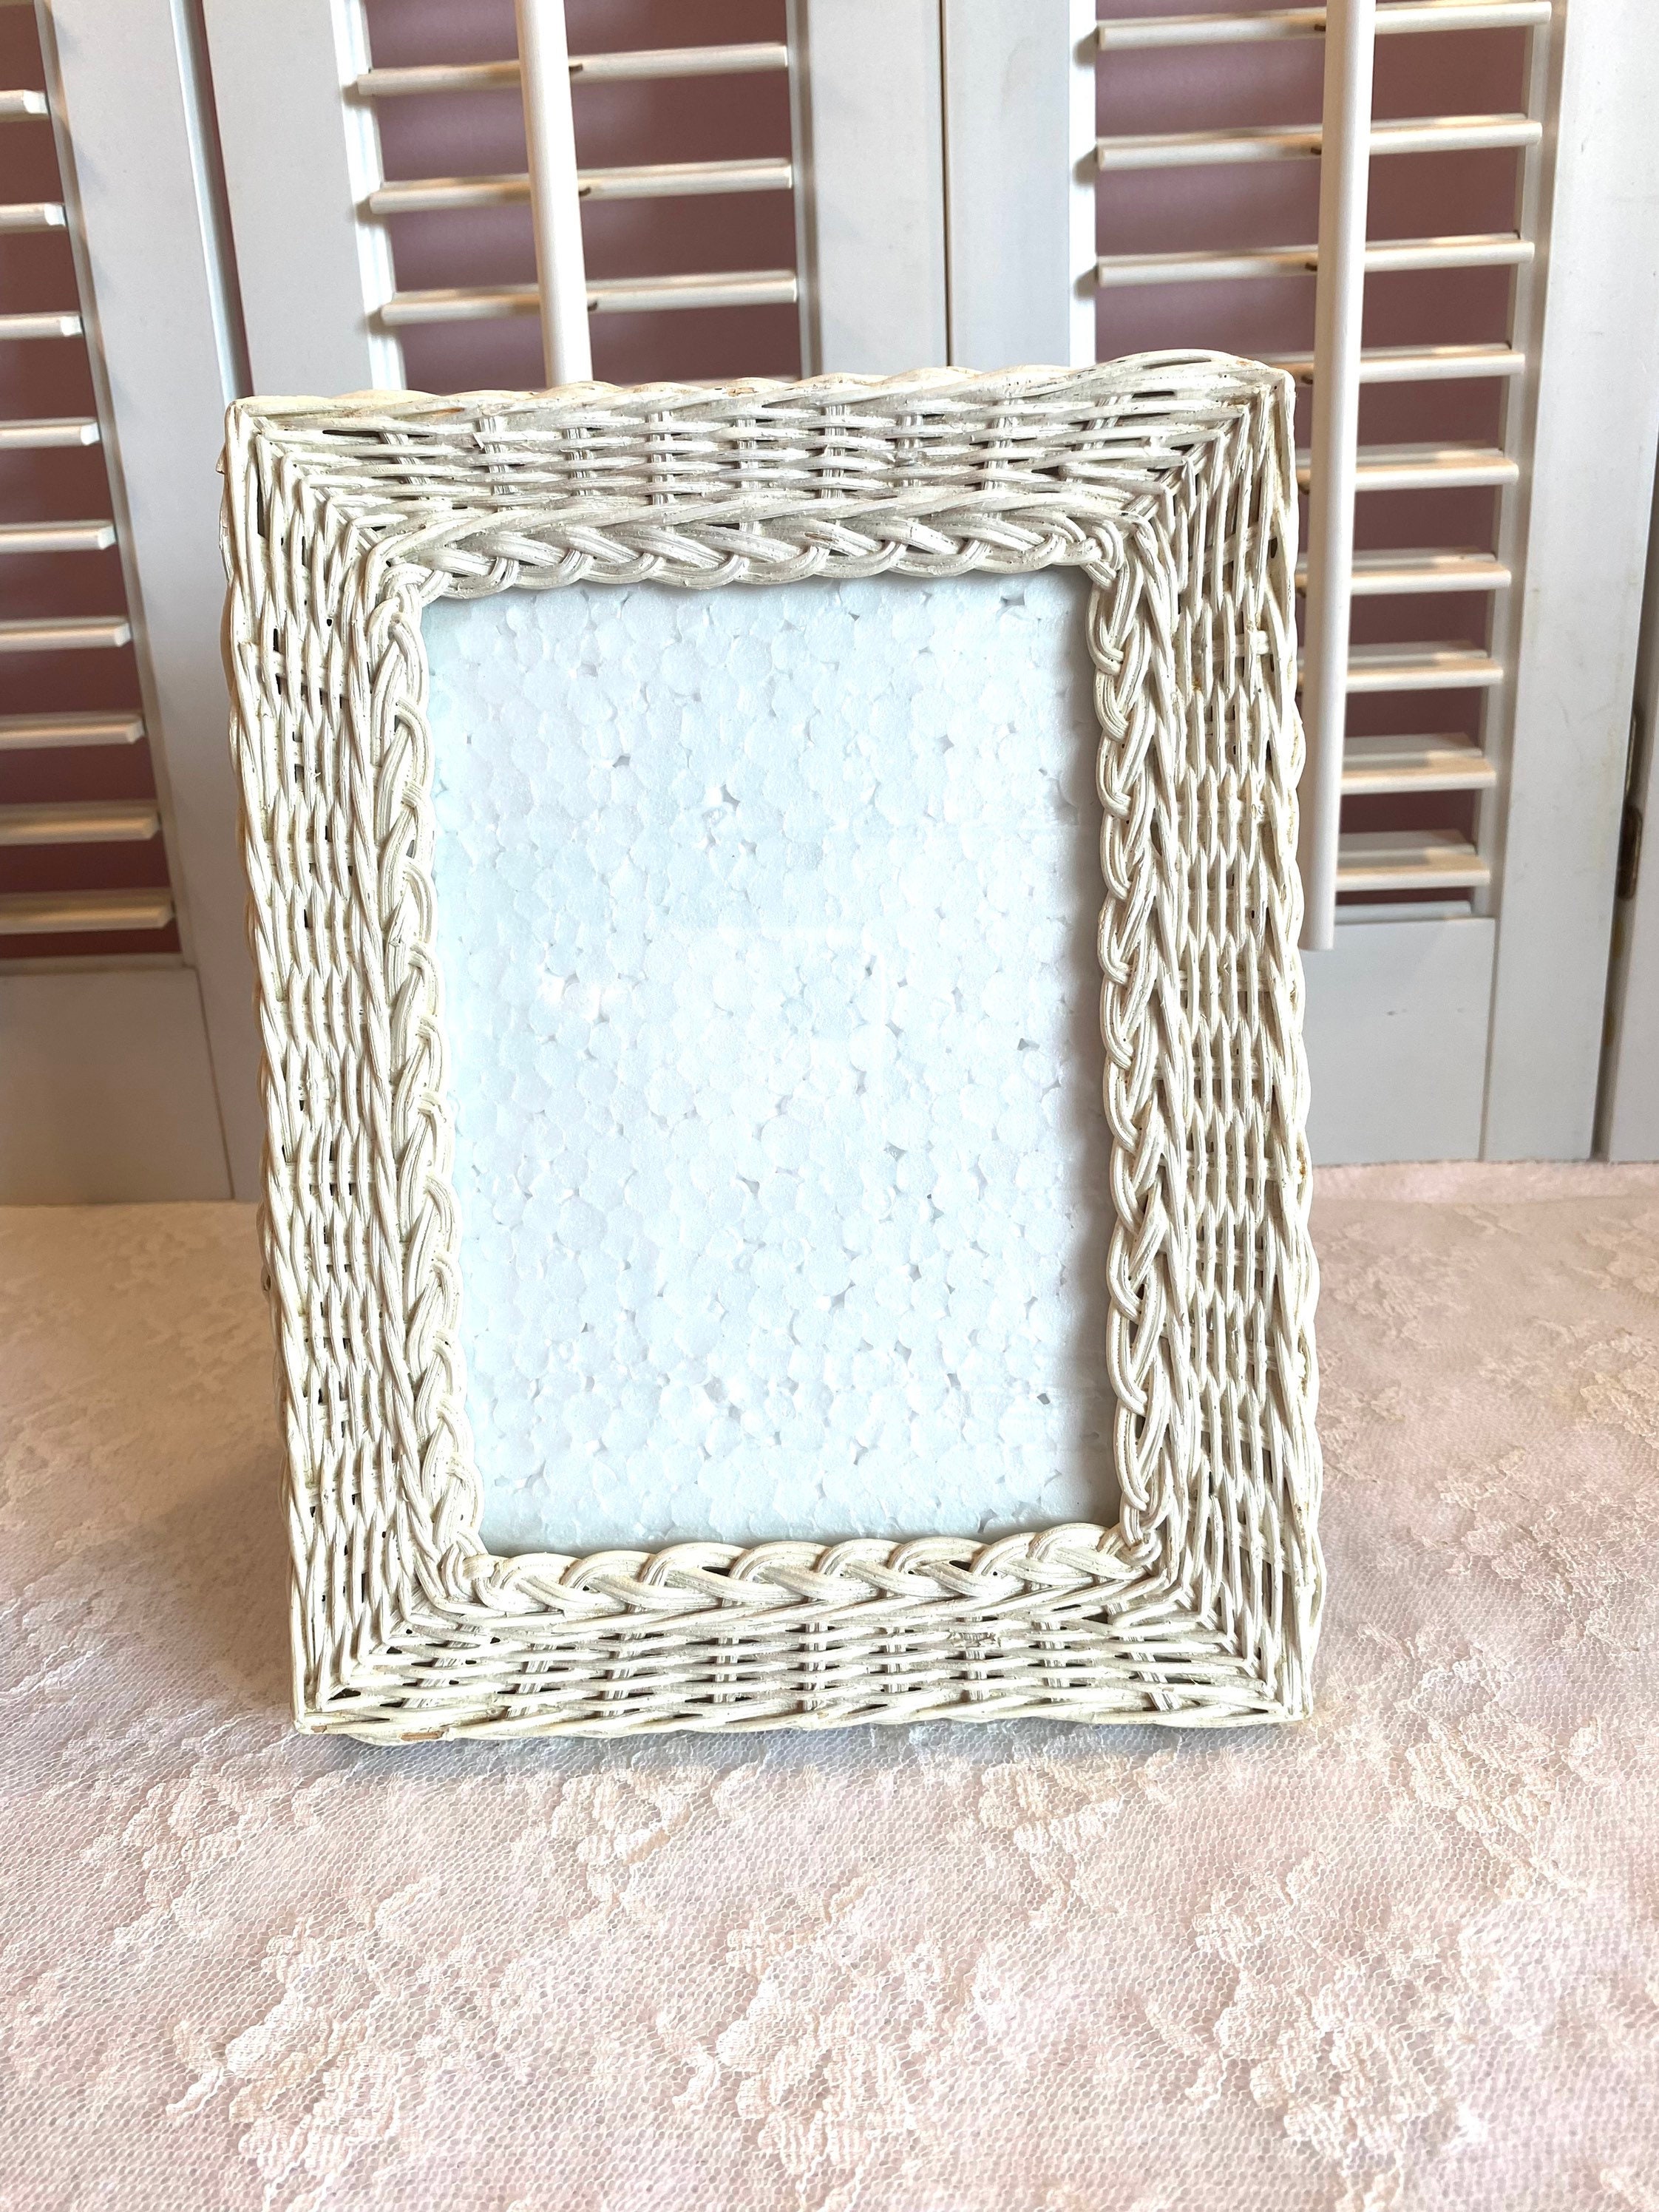 Wicker Weave Picture Frame - 2 sizes available